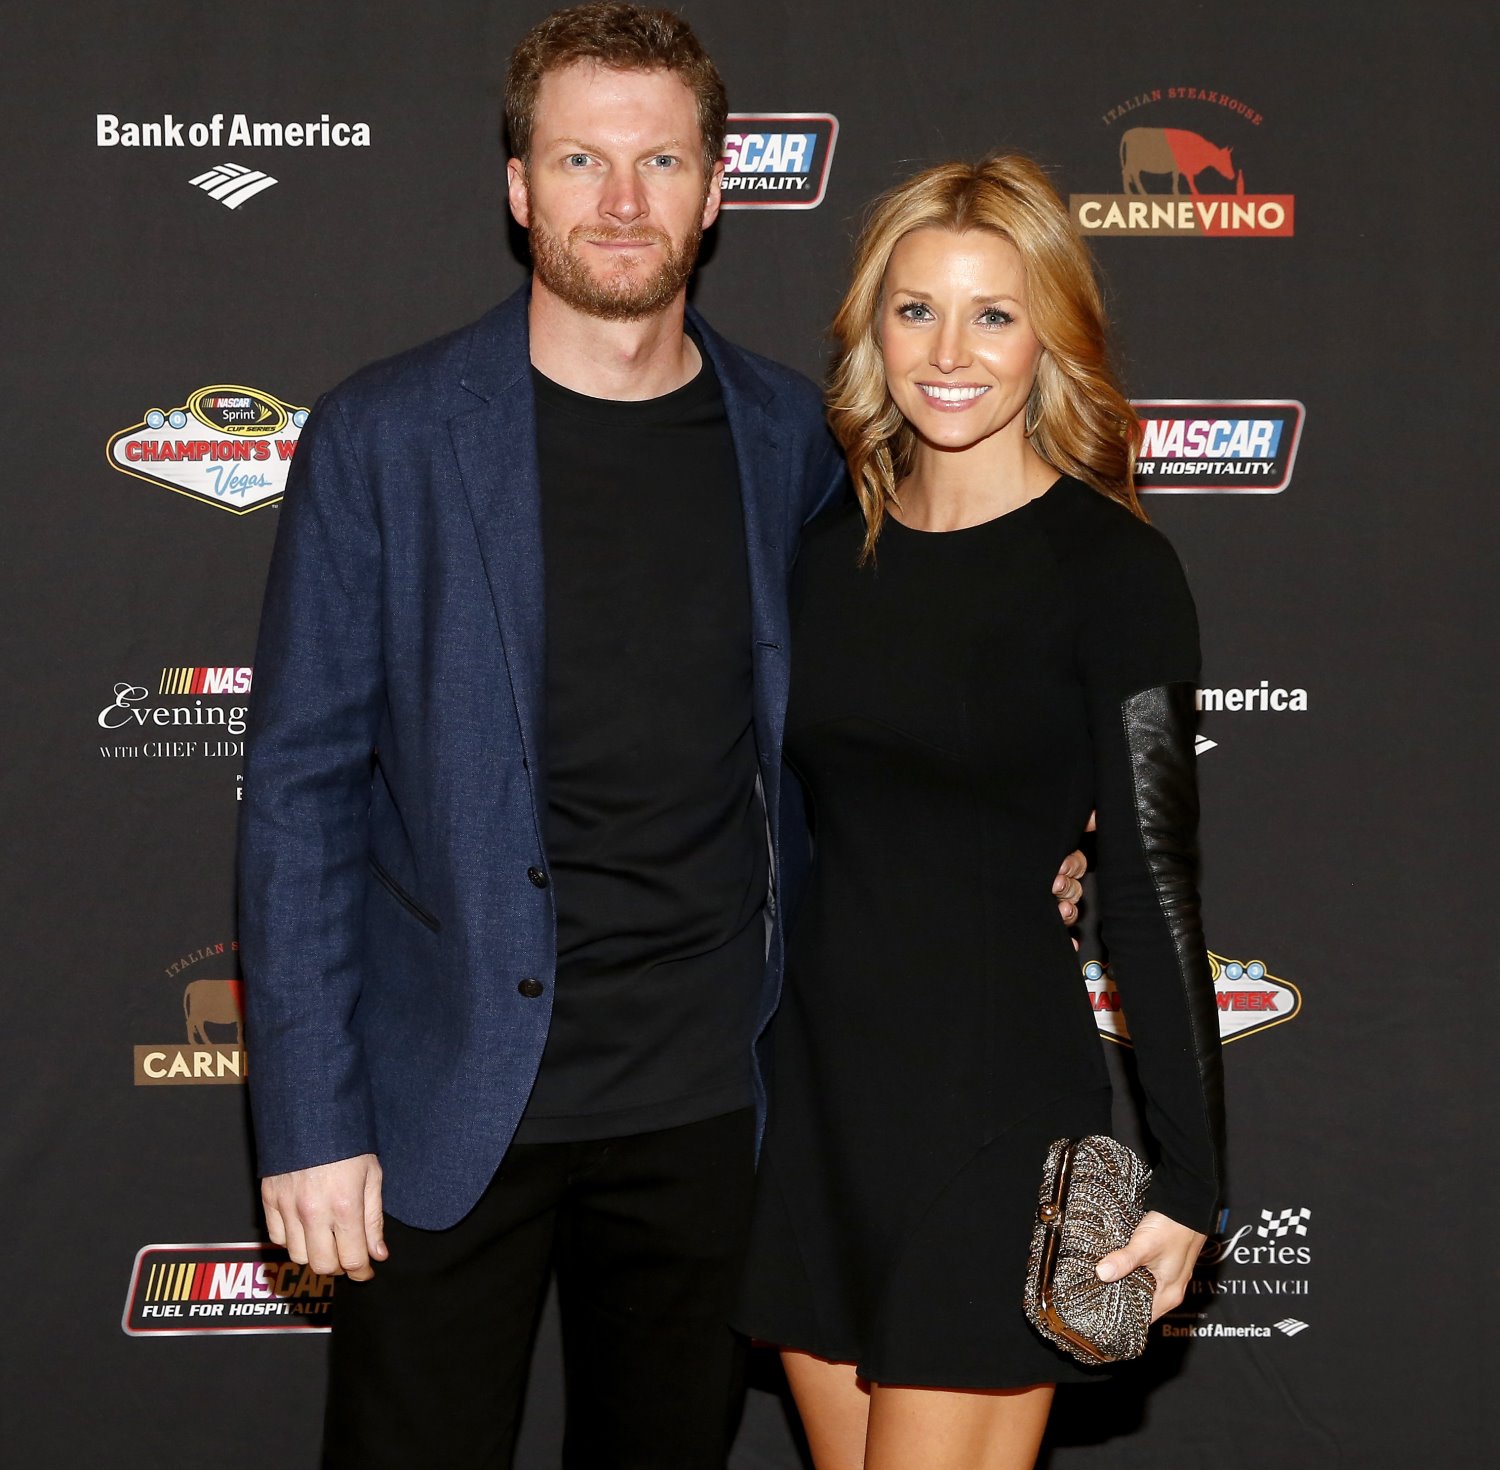 Dale Earnhardt Jr. and girlfriend Amy will marry on New Year's eve